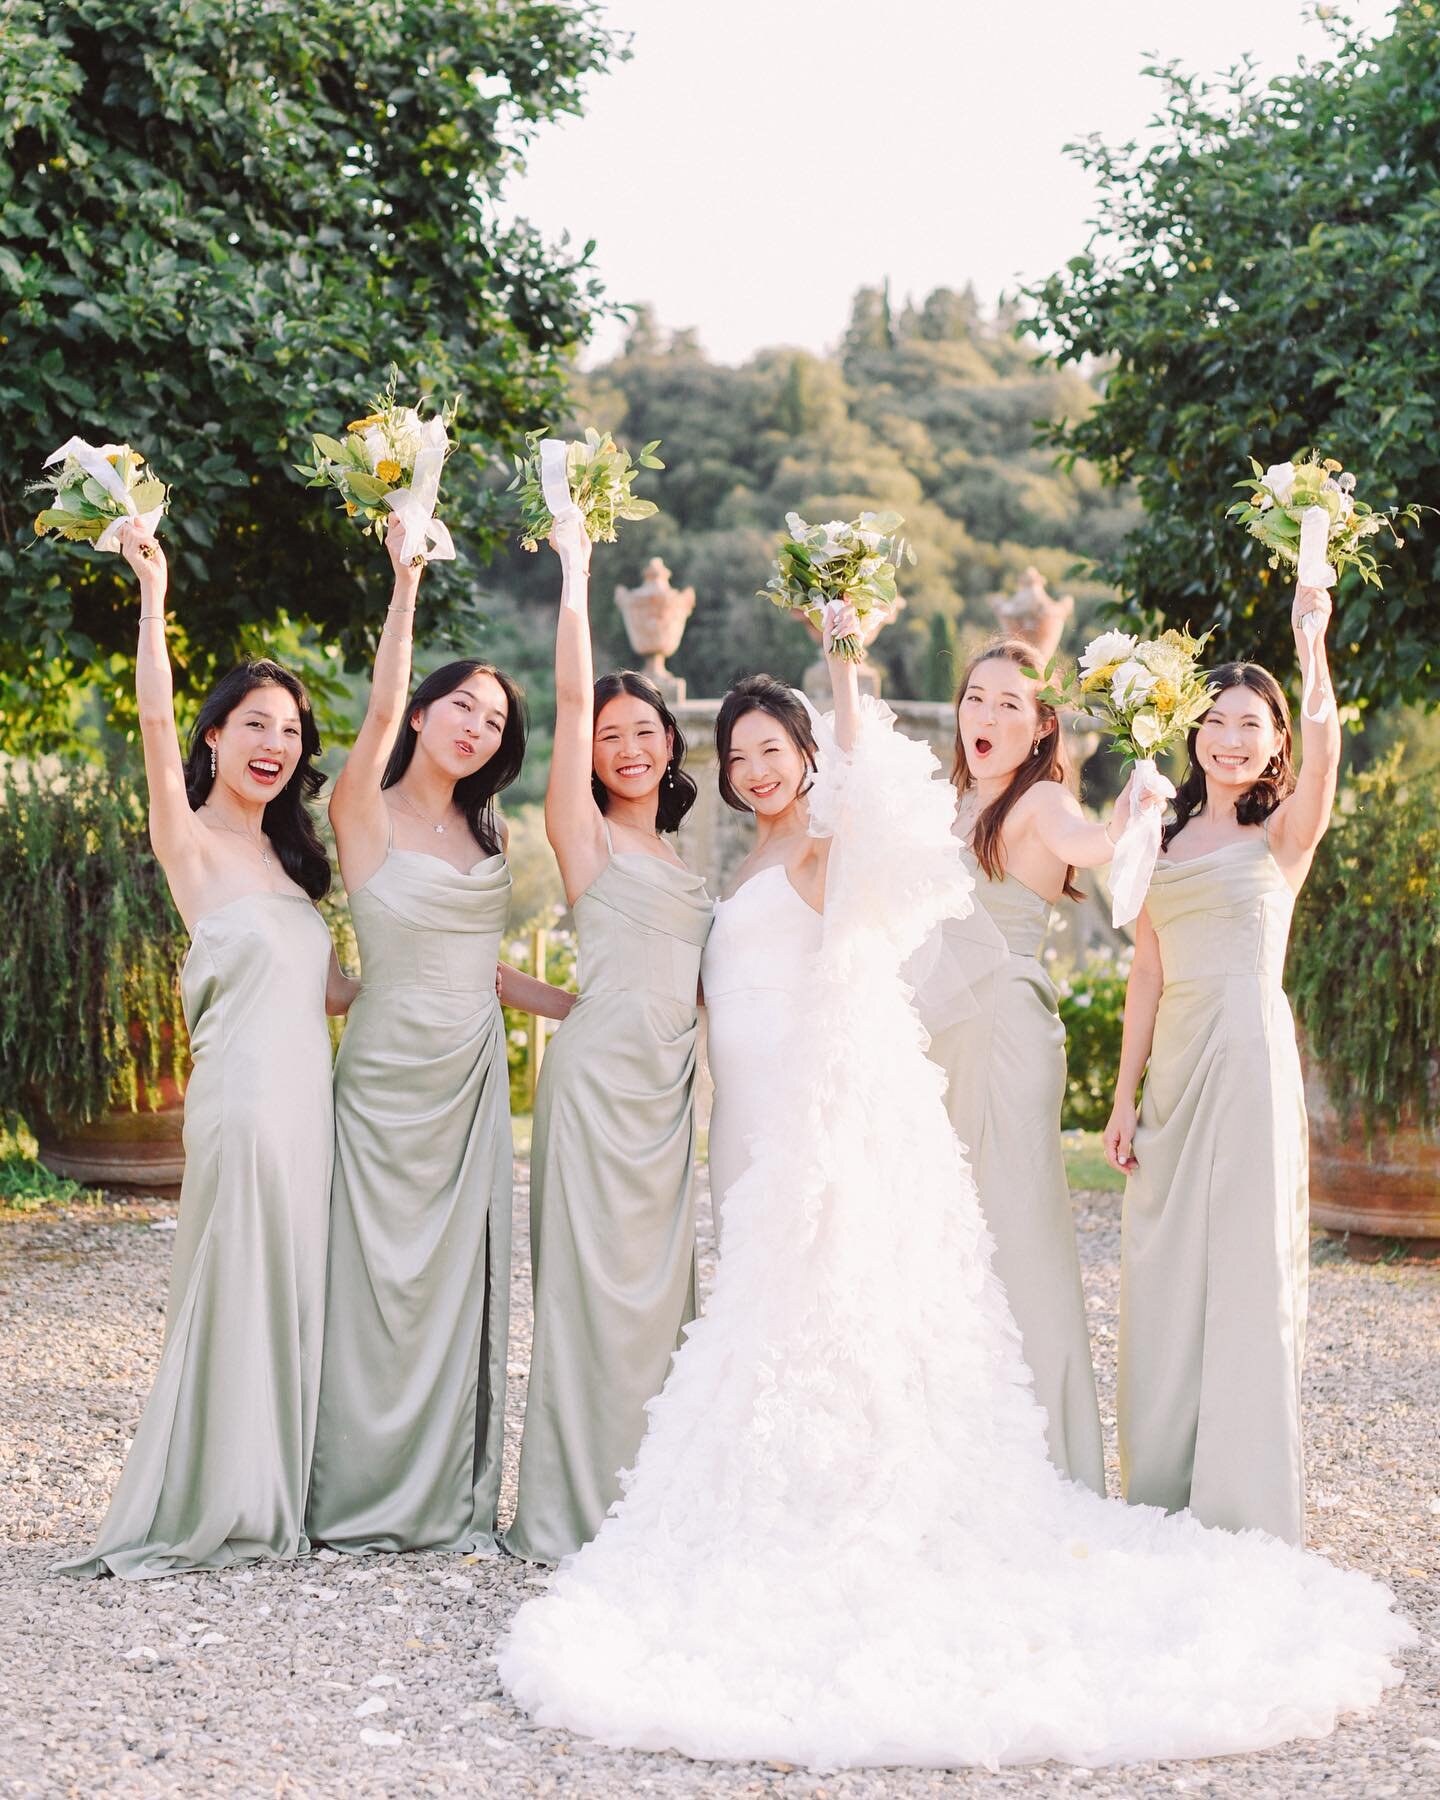 Catherine and her lovely bridesmaids pretty in green! Against the backdrop of the unique gardens of @villamediceadililliano our bride glows with joy, her gown a vision of timeless beauty. And the girls? Effortlessly chic in their soft green dresses💛